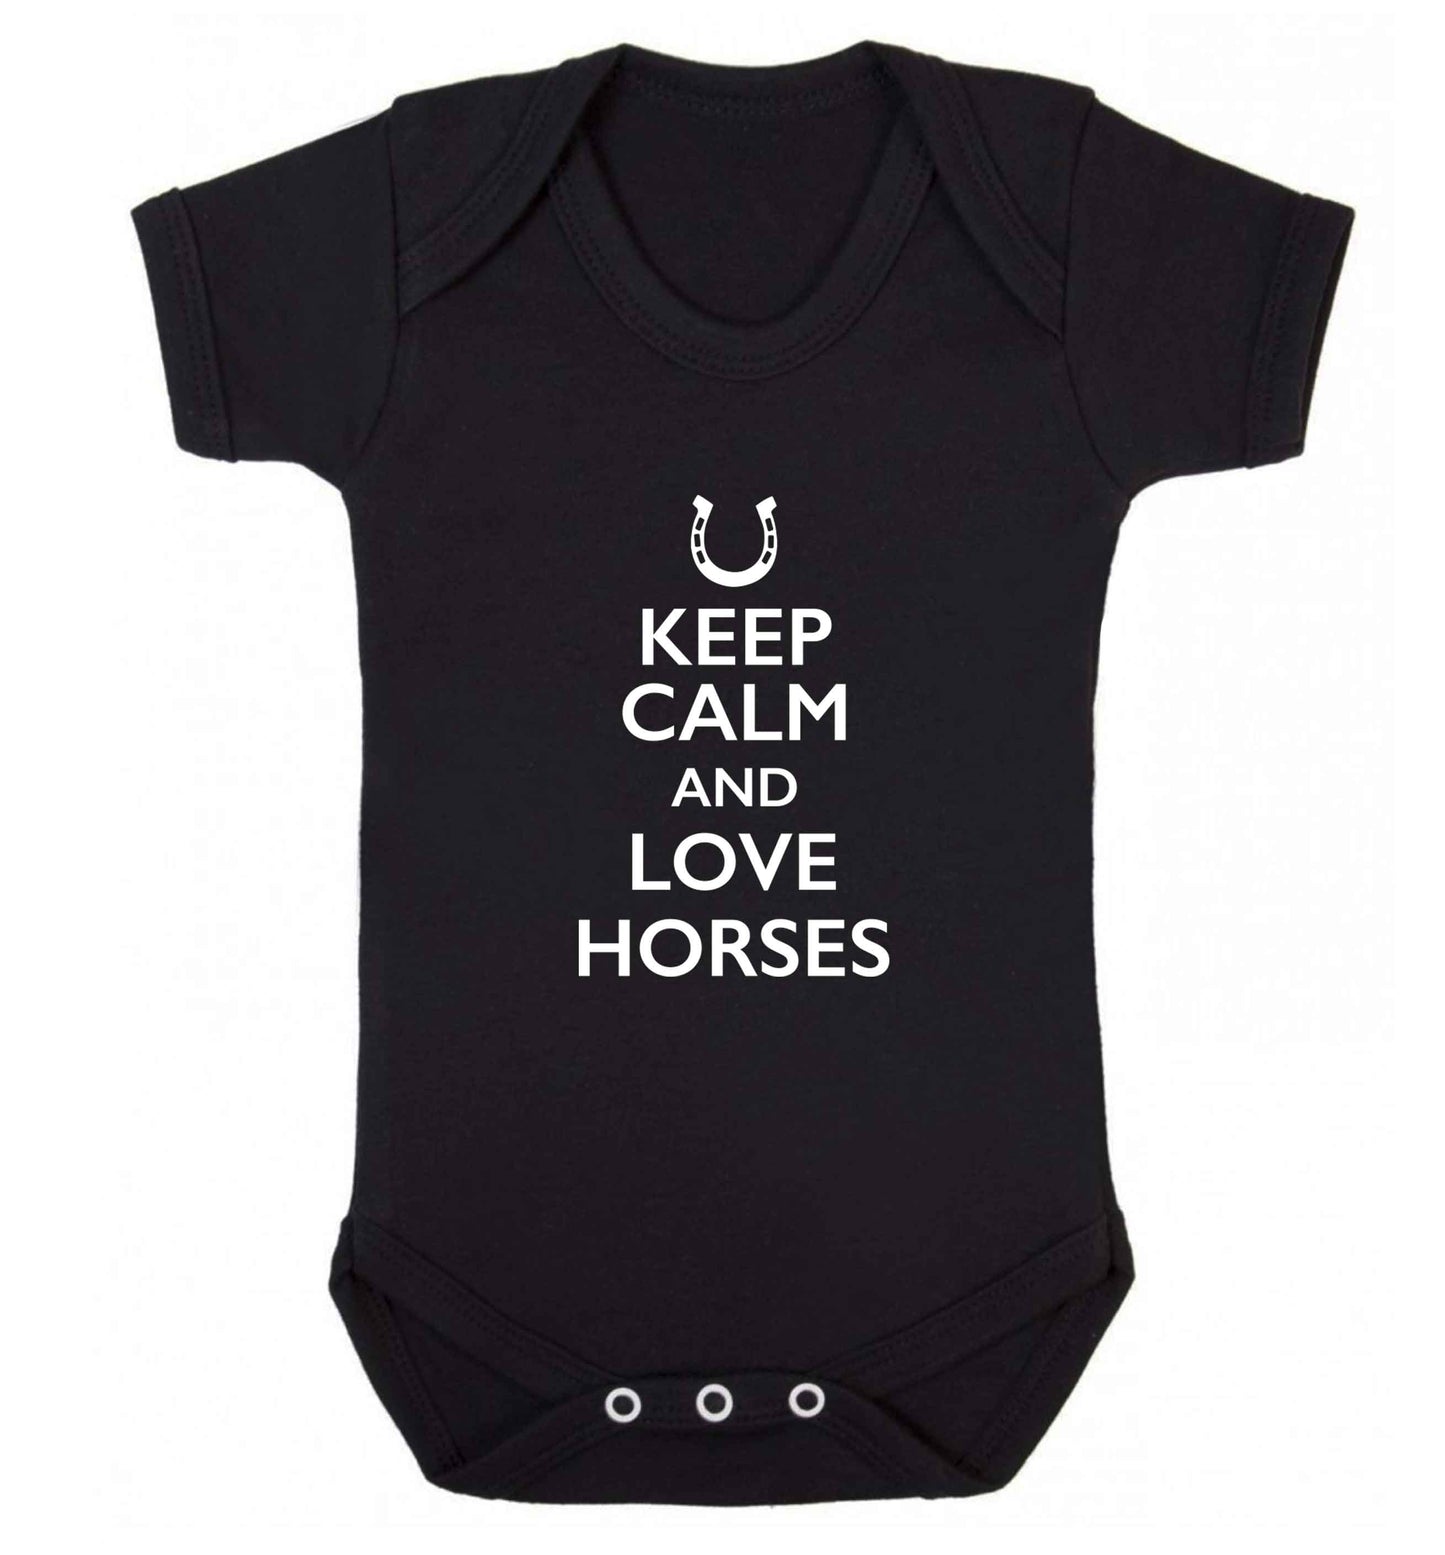 Keep calm and love horses baby vest black 18-24 months